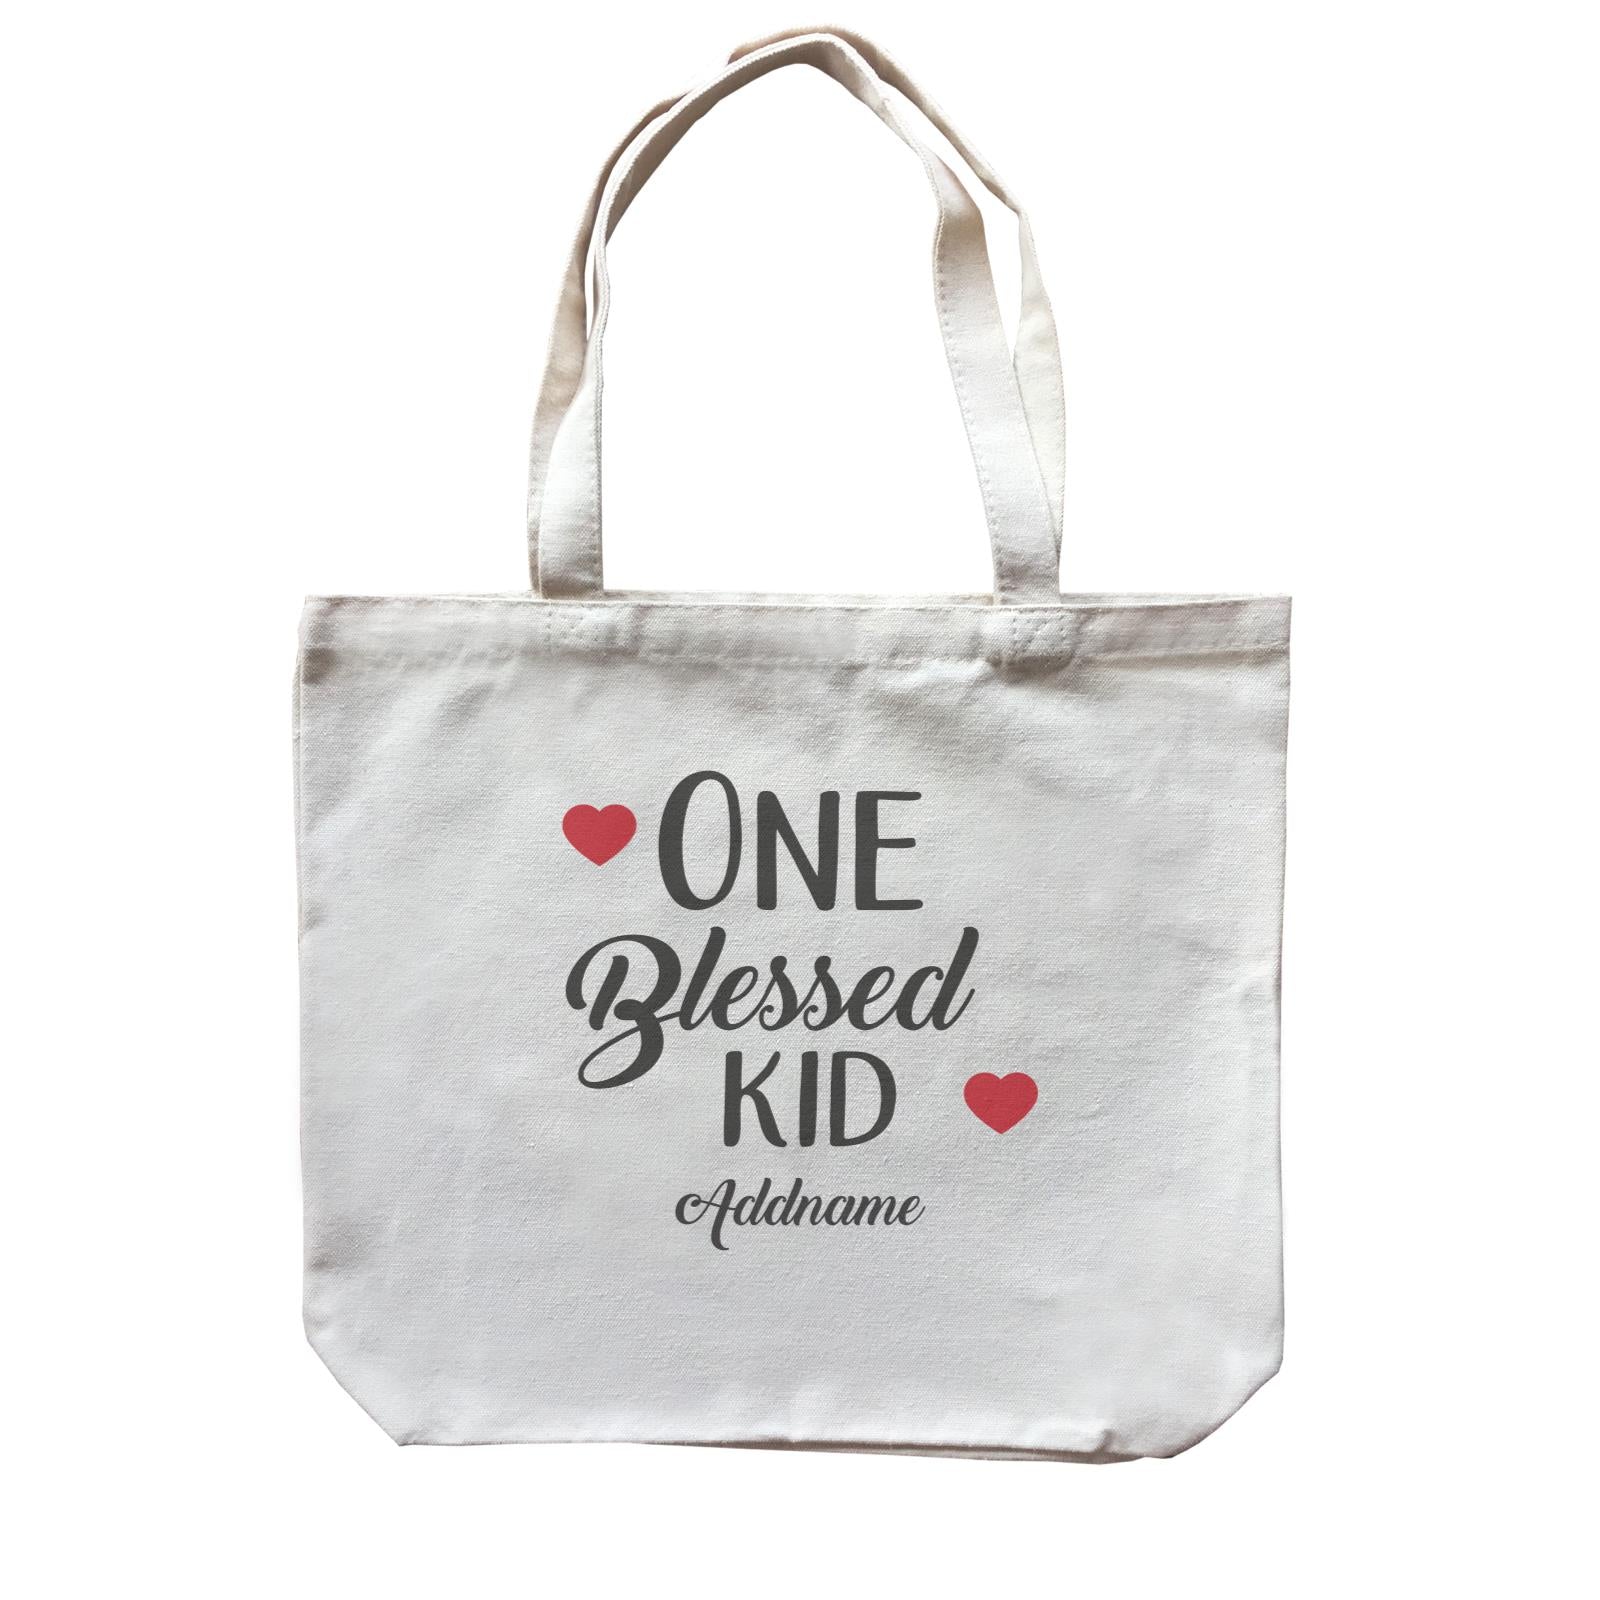 Christian Series One Blessed Kid Addname Canvas Bag